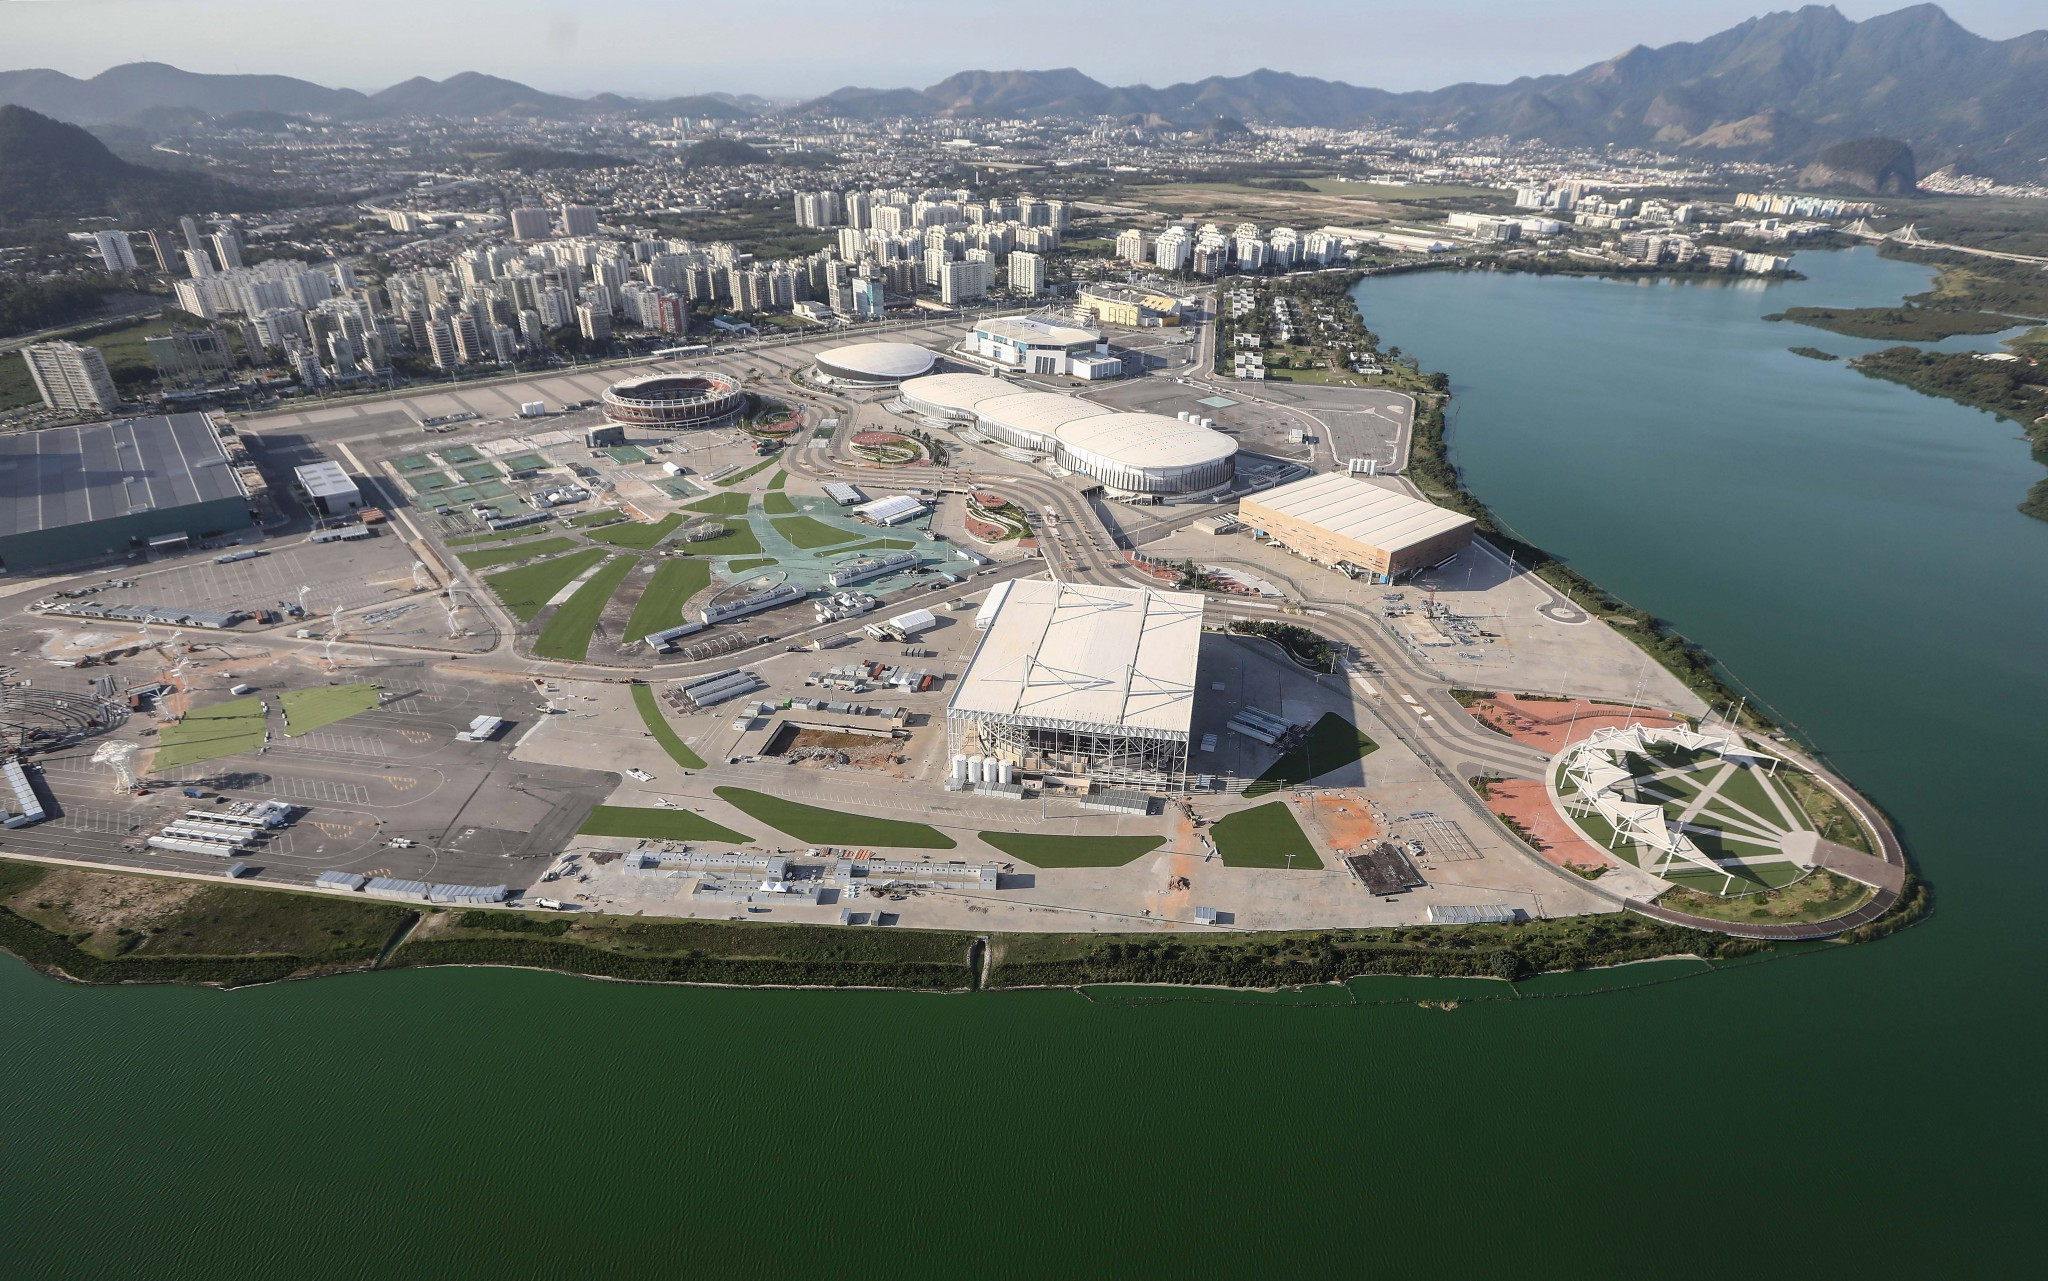 The Olympic Park in Barra de Tijuca one year on from the Olympic Games ©Getty Images